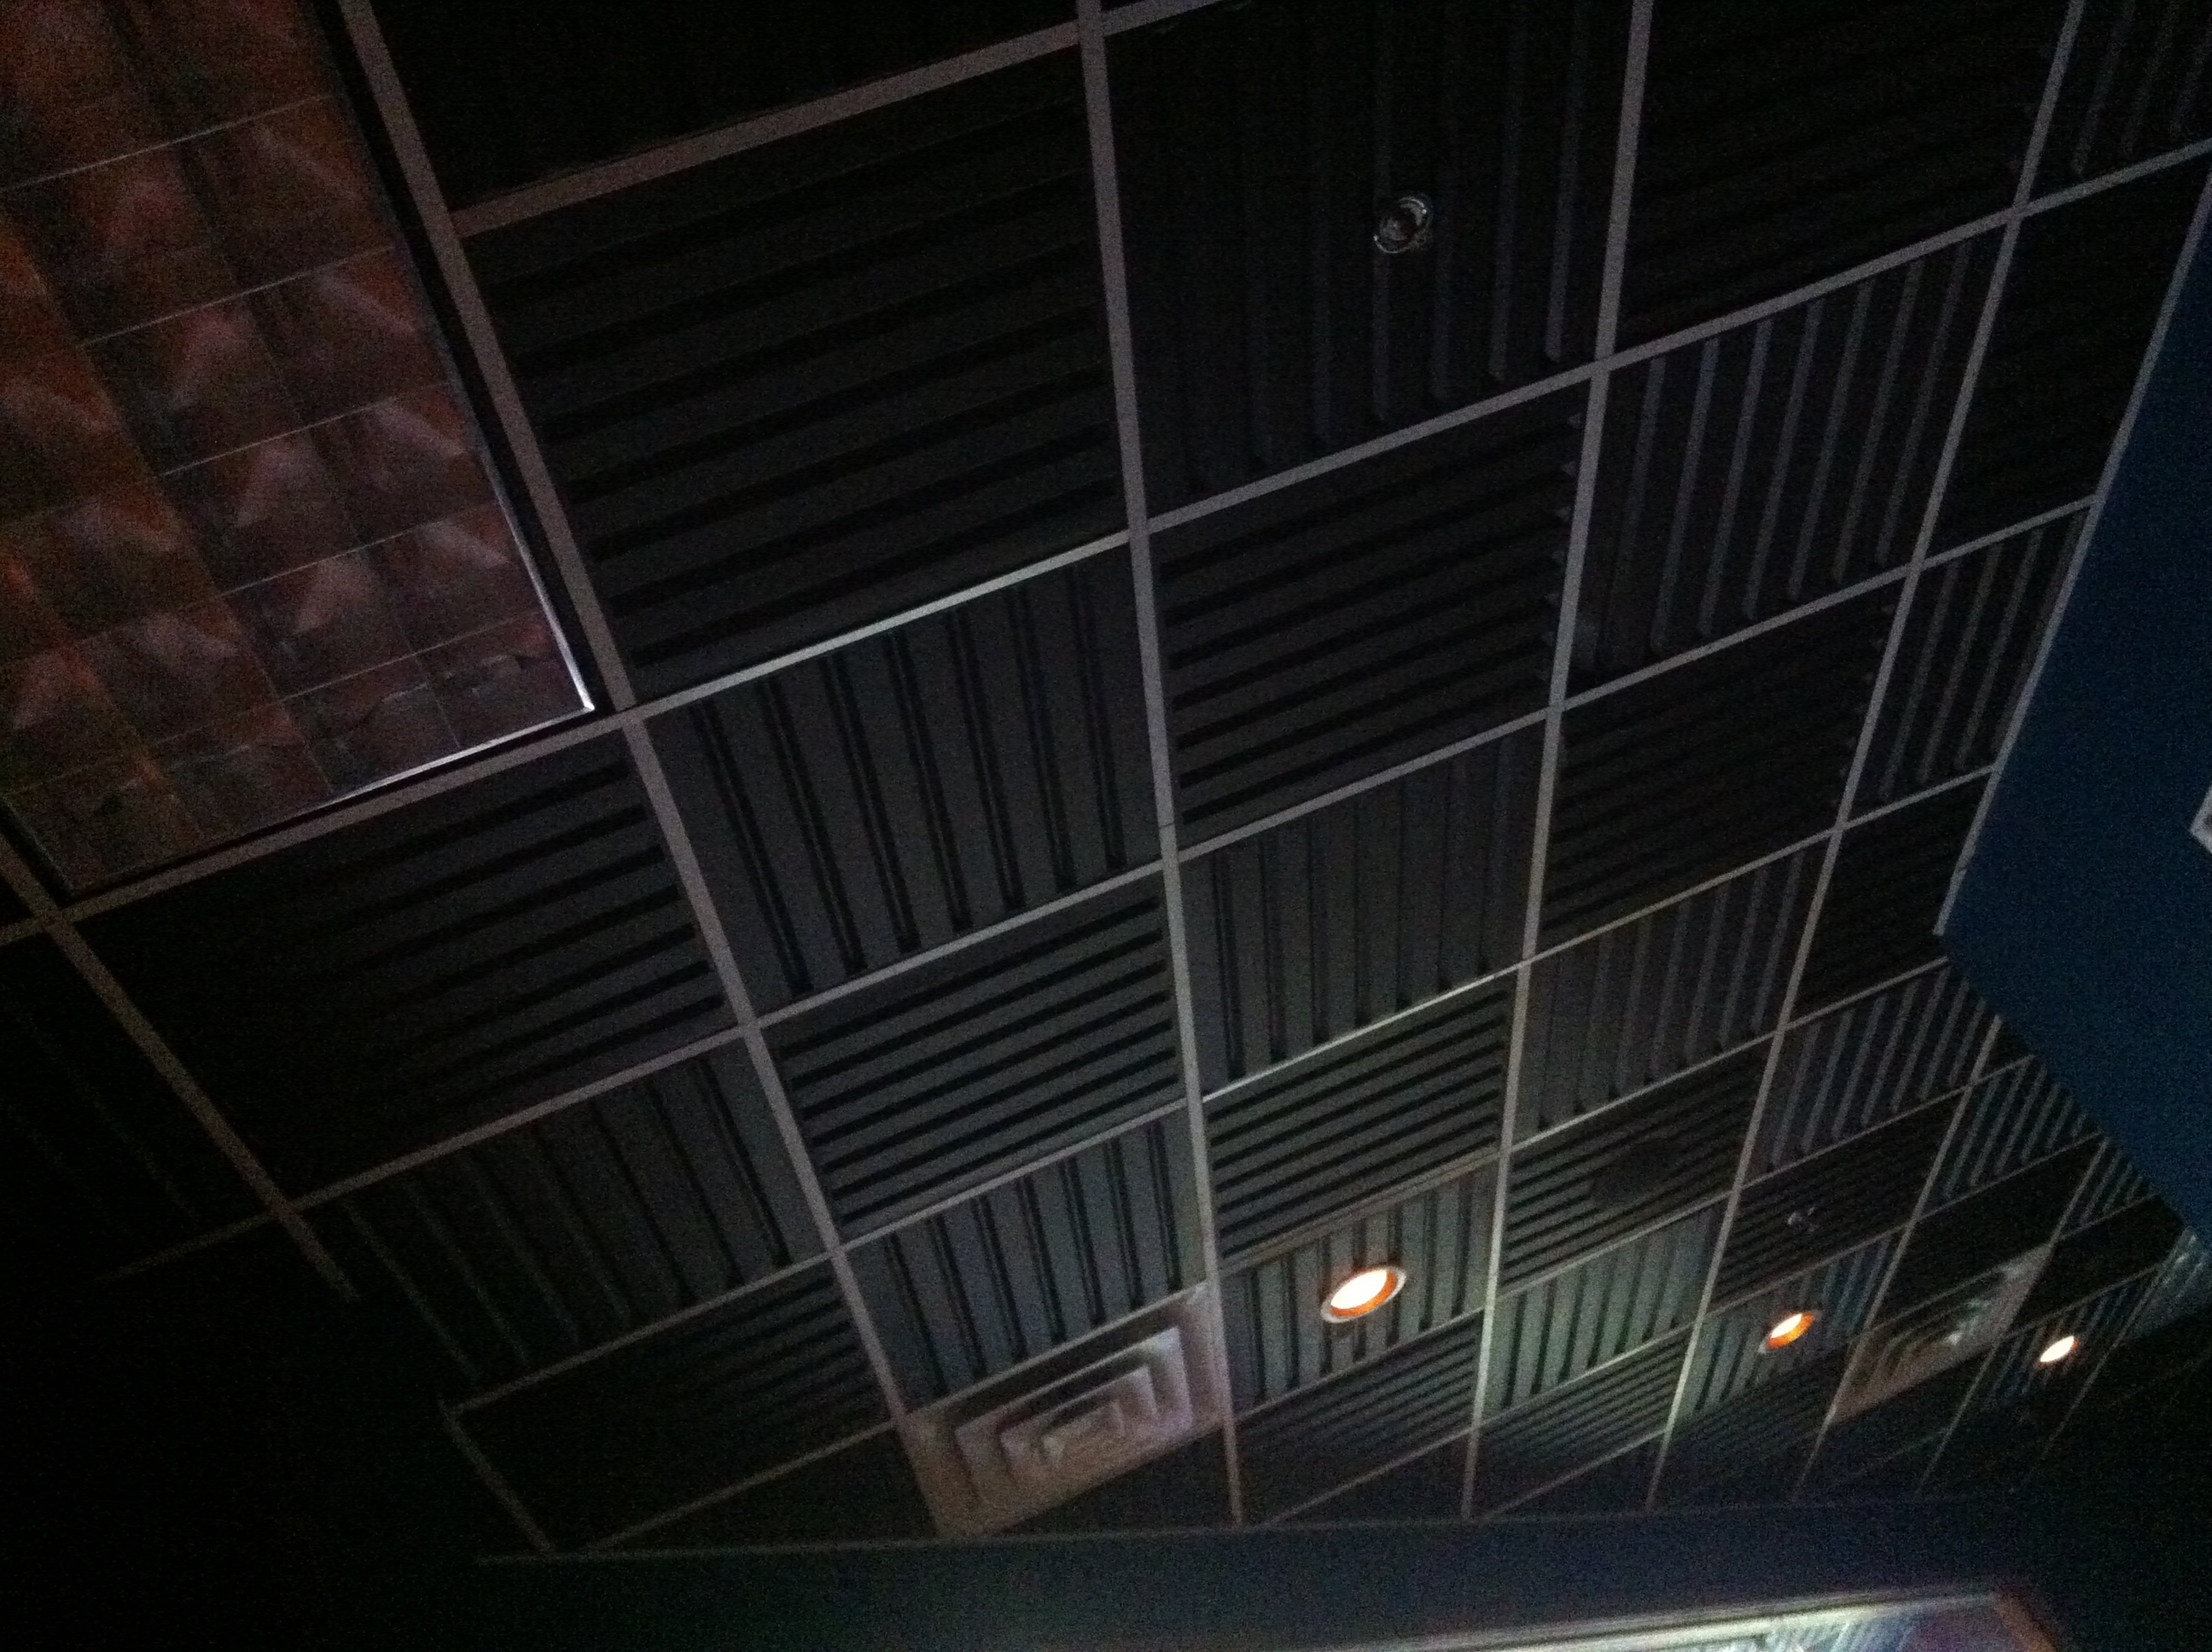 Sound Absorbing Ceiling Tilesfacts that nobody told you about soundproof ceiling tiles